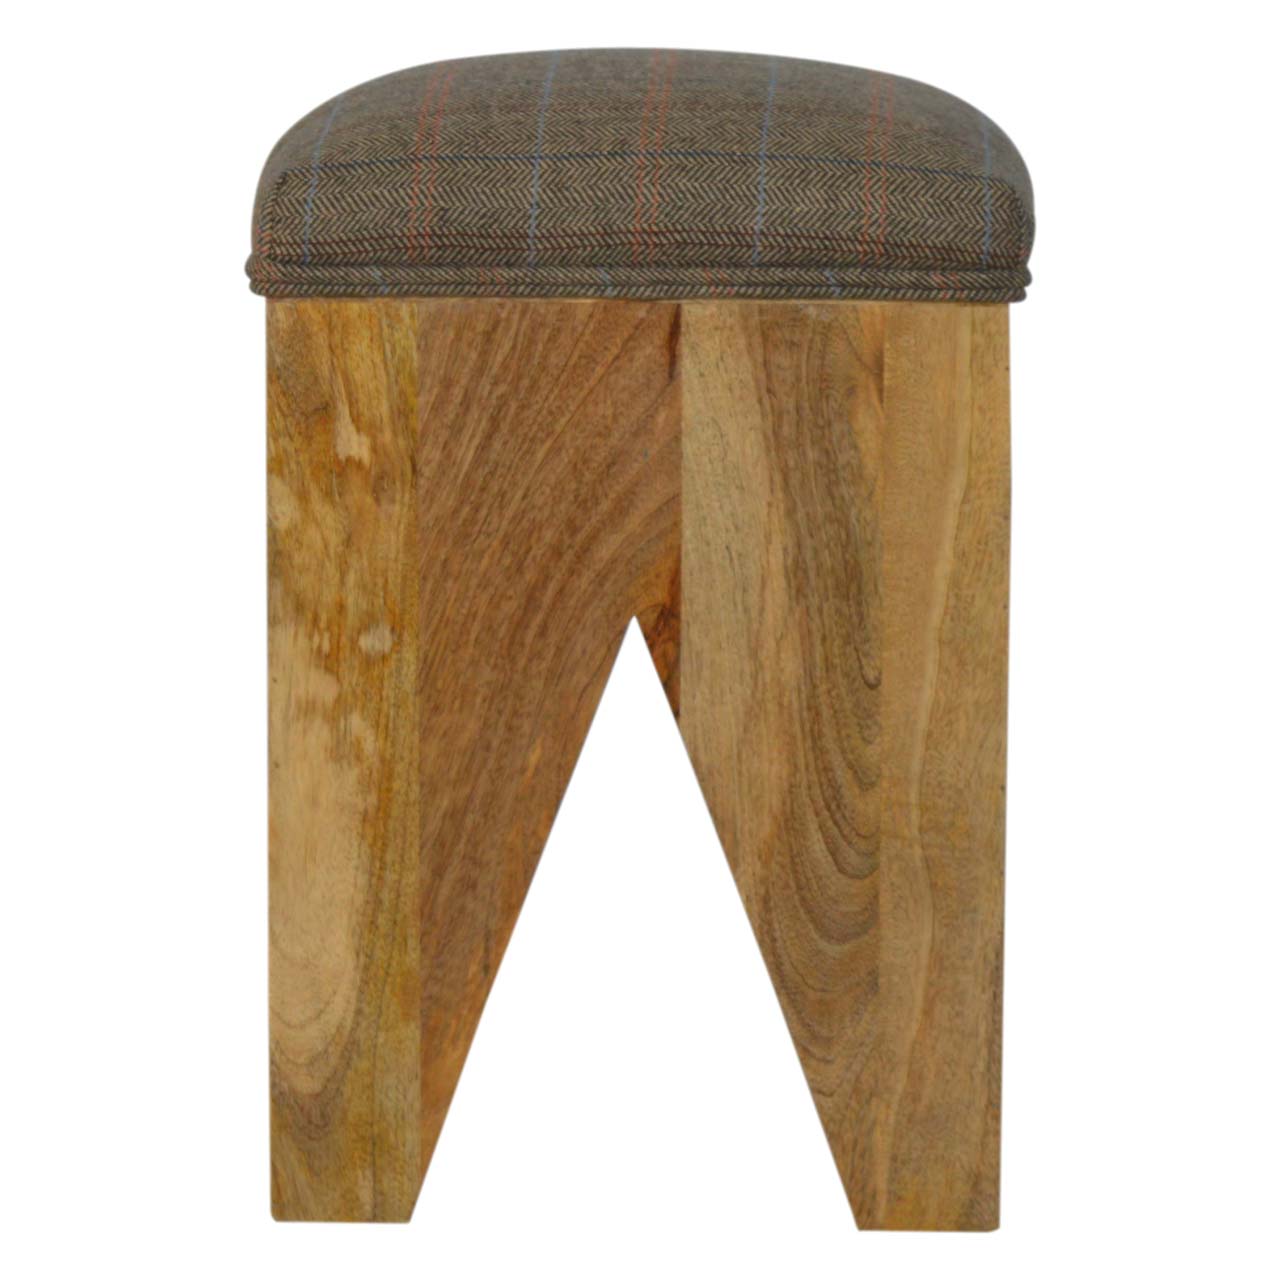 Solid Wood Cut Out Stool with Multi Tweed Seat Pad